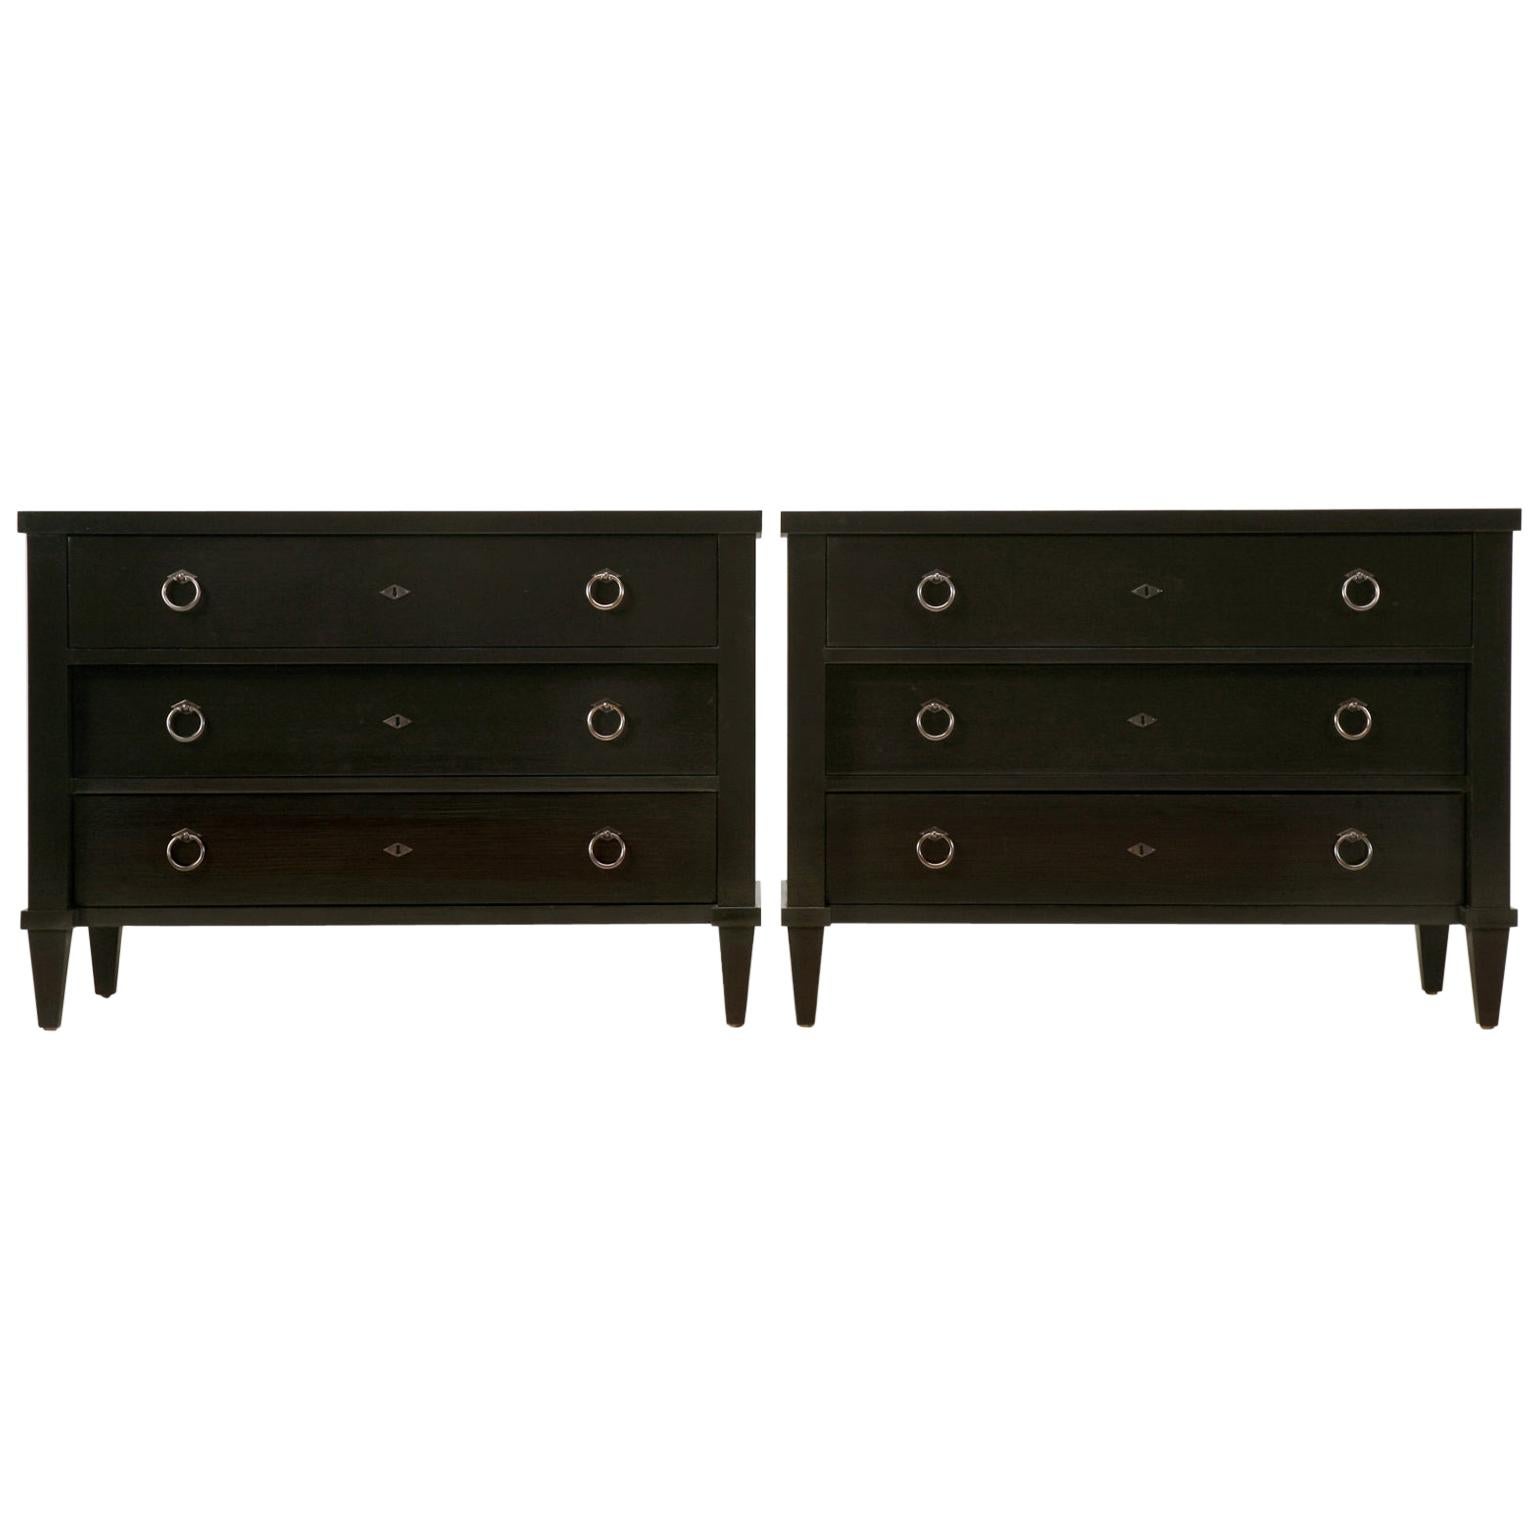 Custom Black Lacquer Commodes or Chests Gunmetal Hardware in Any Dimension